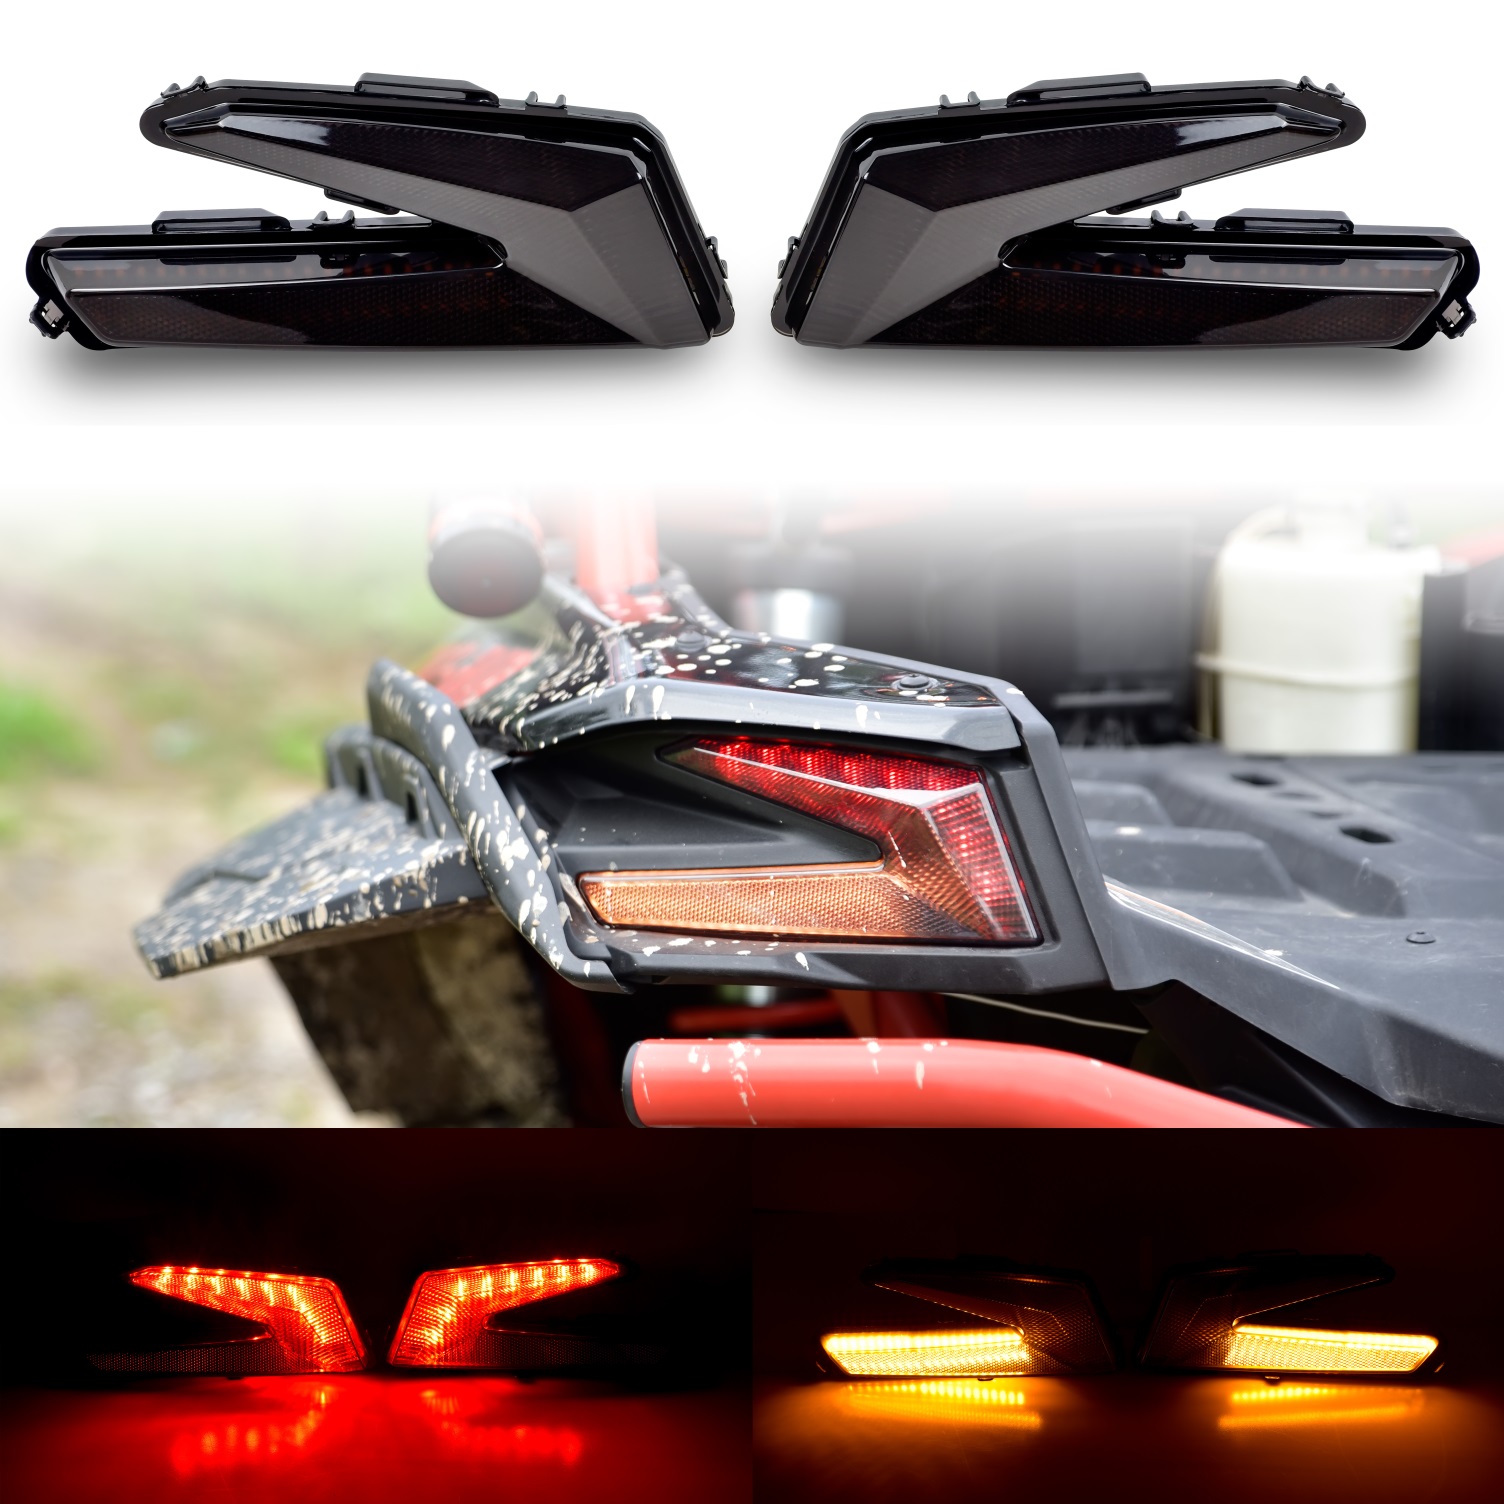 LED Taillights with Yellow Turn Signal Light for Can-Am Maverick